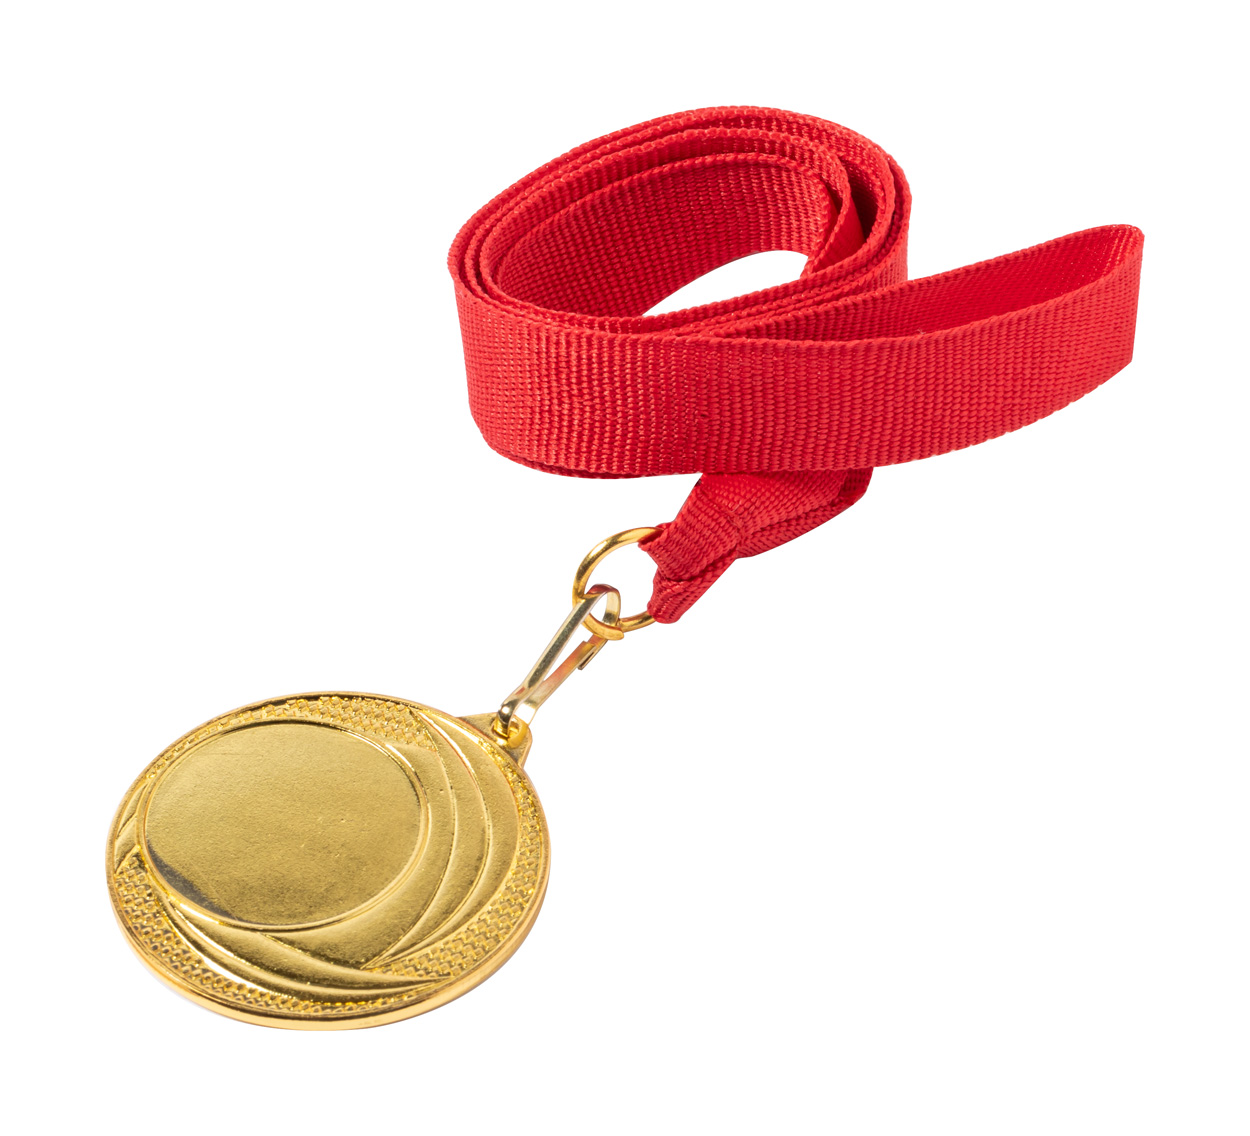 Konial medals - gold